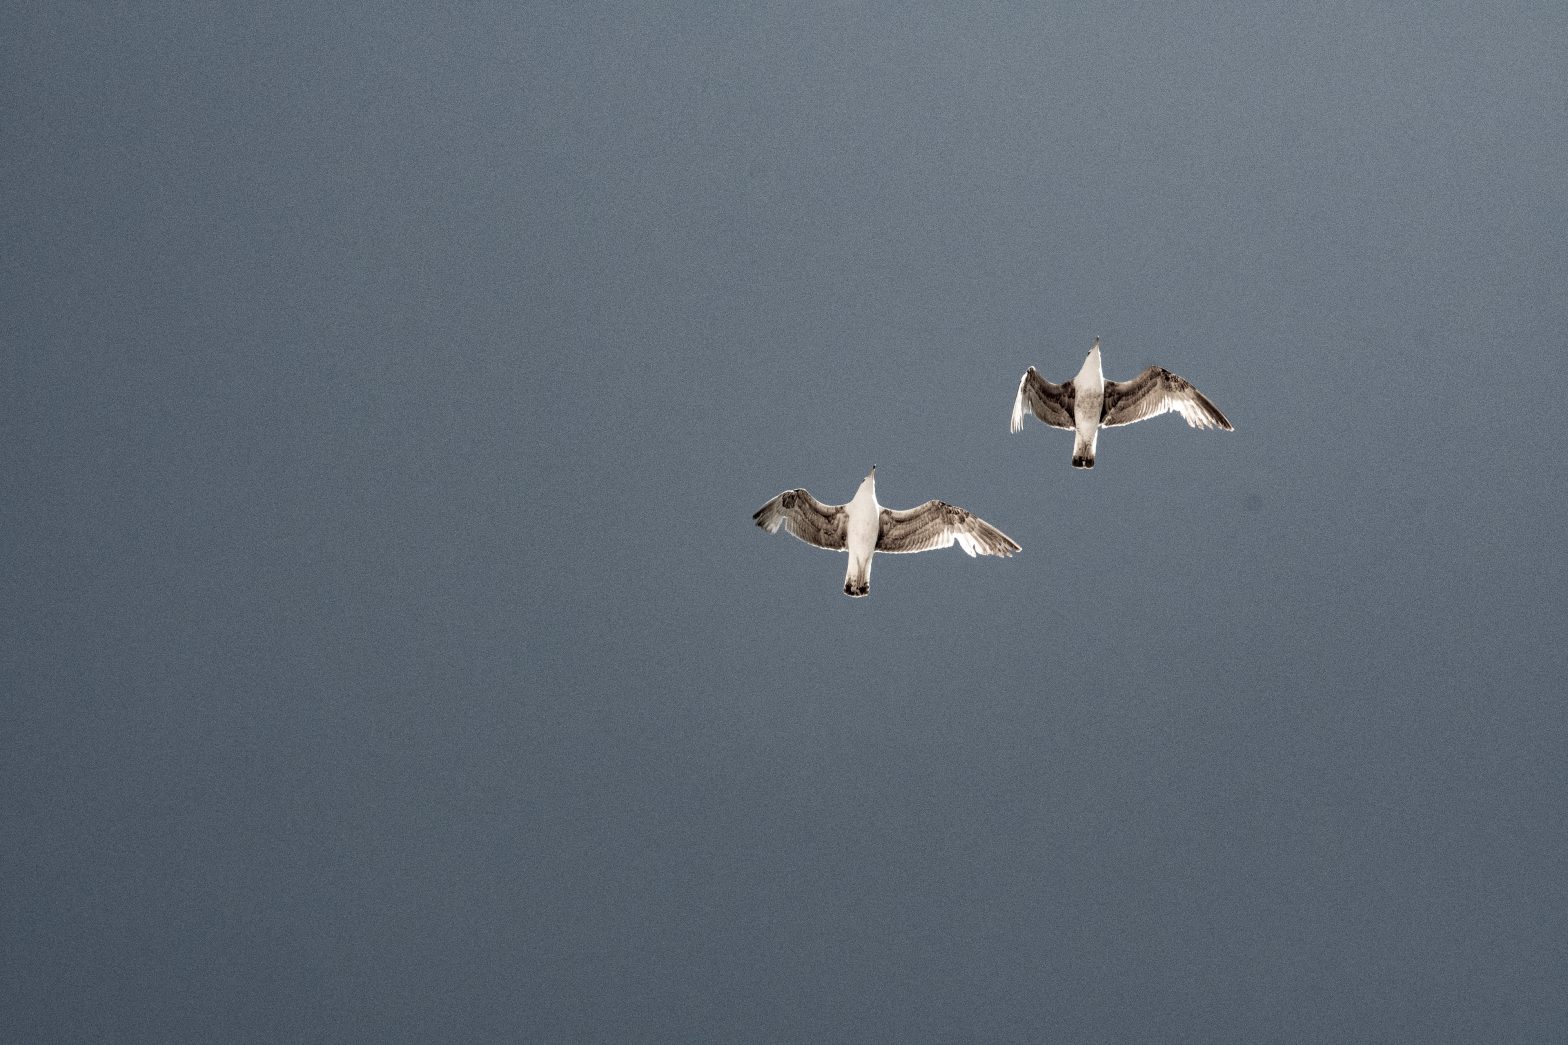 An picture of two seagulls with a grey sky in the background.